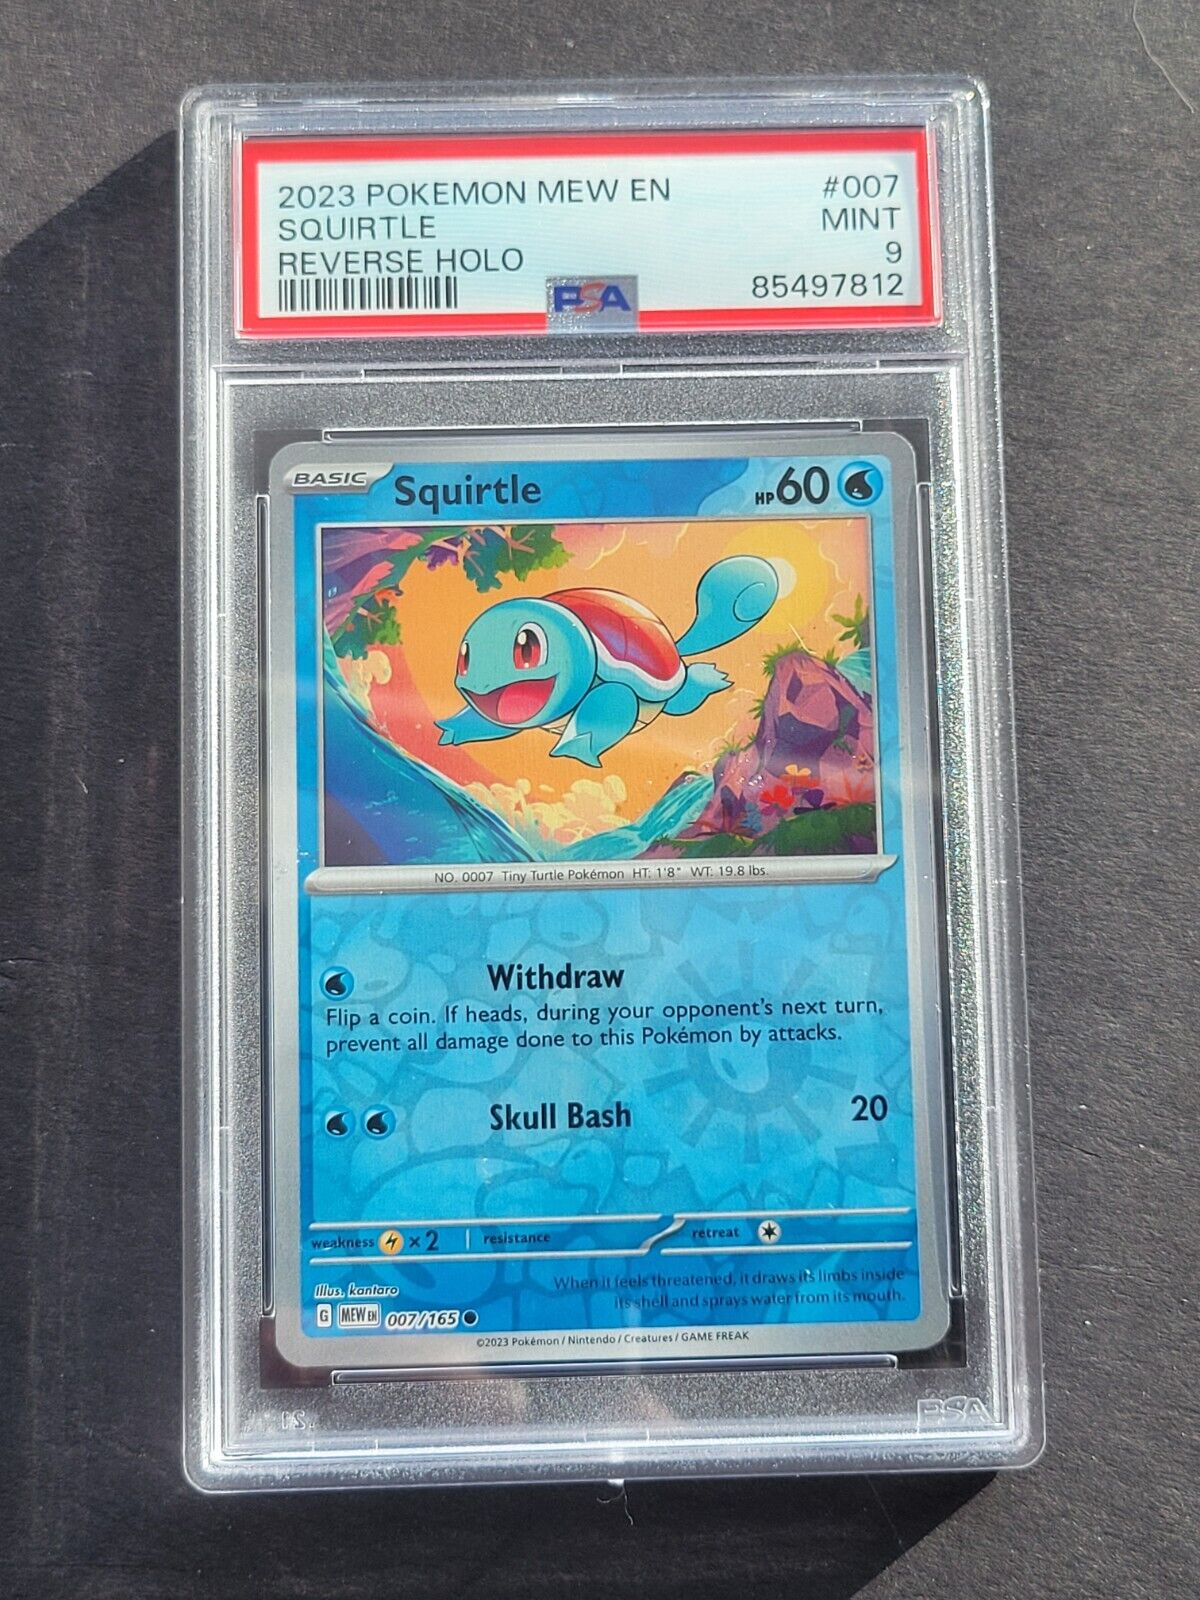 PSA 9 SQUIRTLE 007/165 - SCARLET & VIOLET 151 REVERSE HOLO ENGLISH - MINT